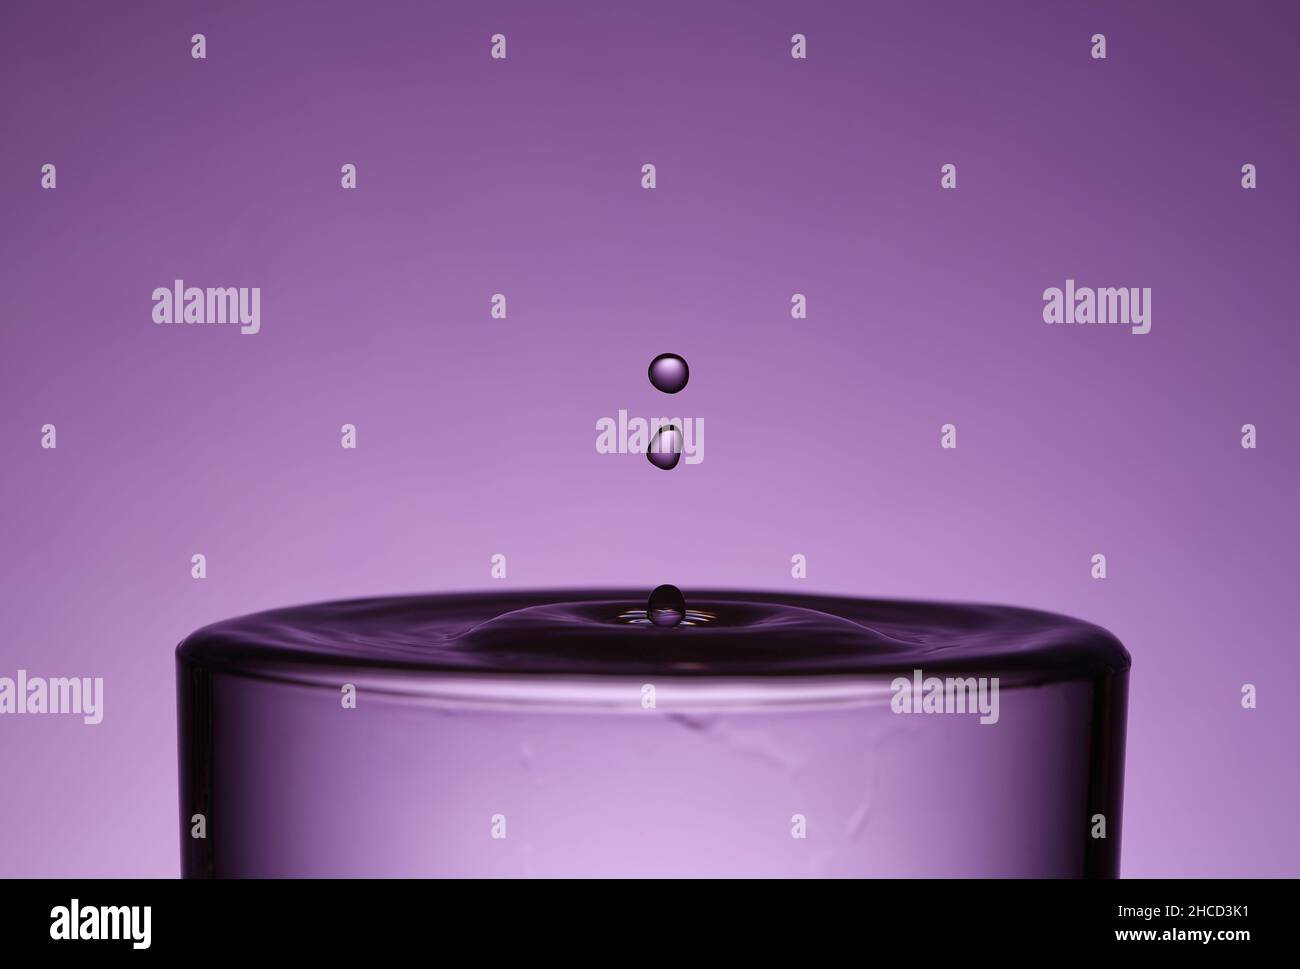 Two droplets fall down into glass of liquid on violet background Stock Photo